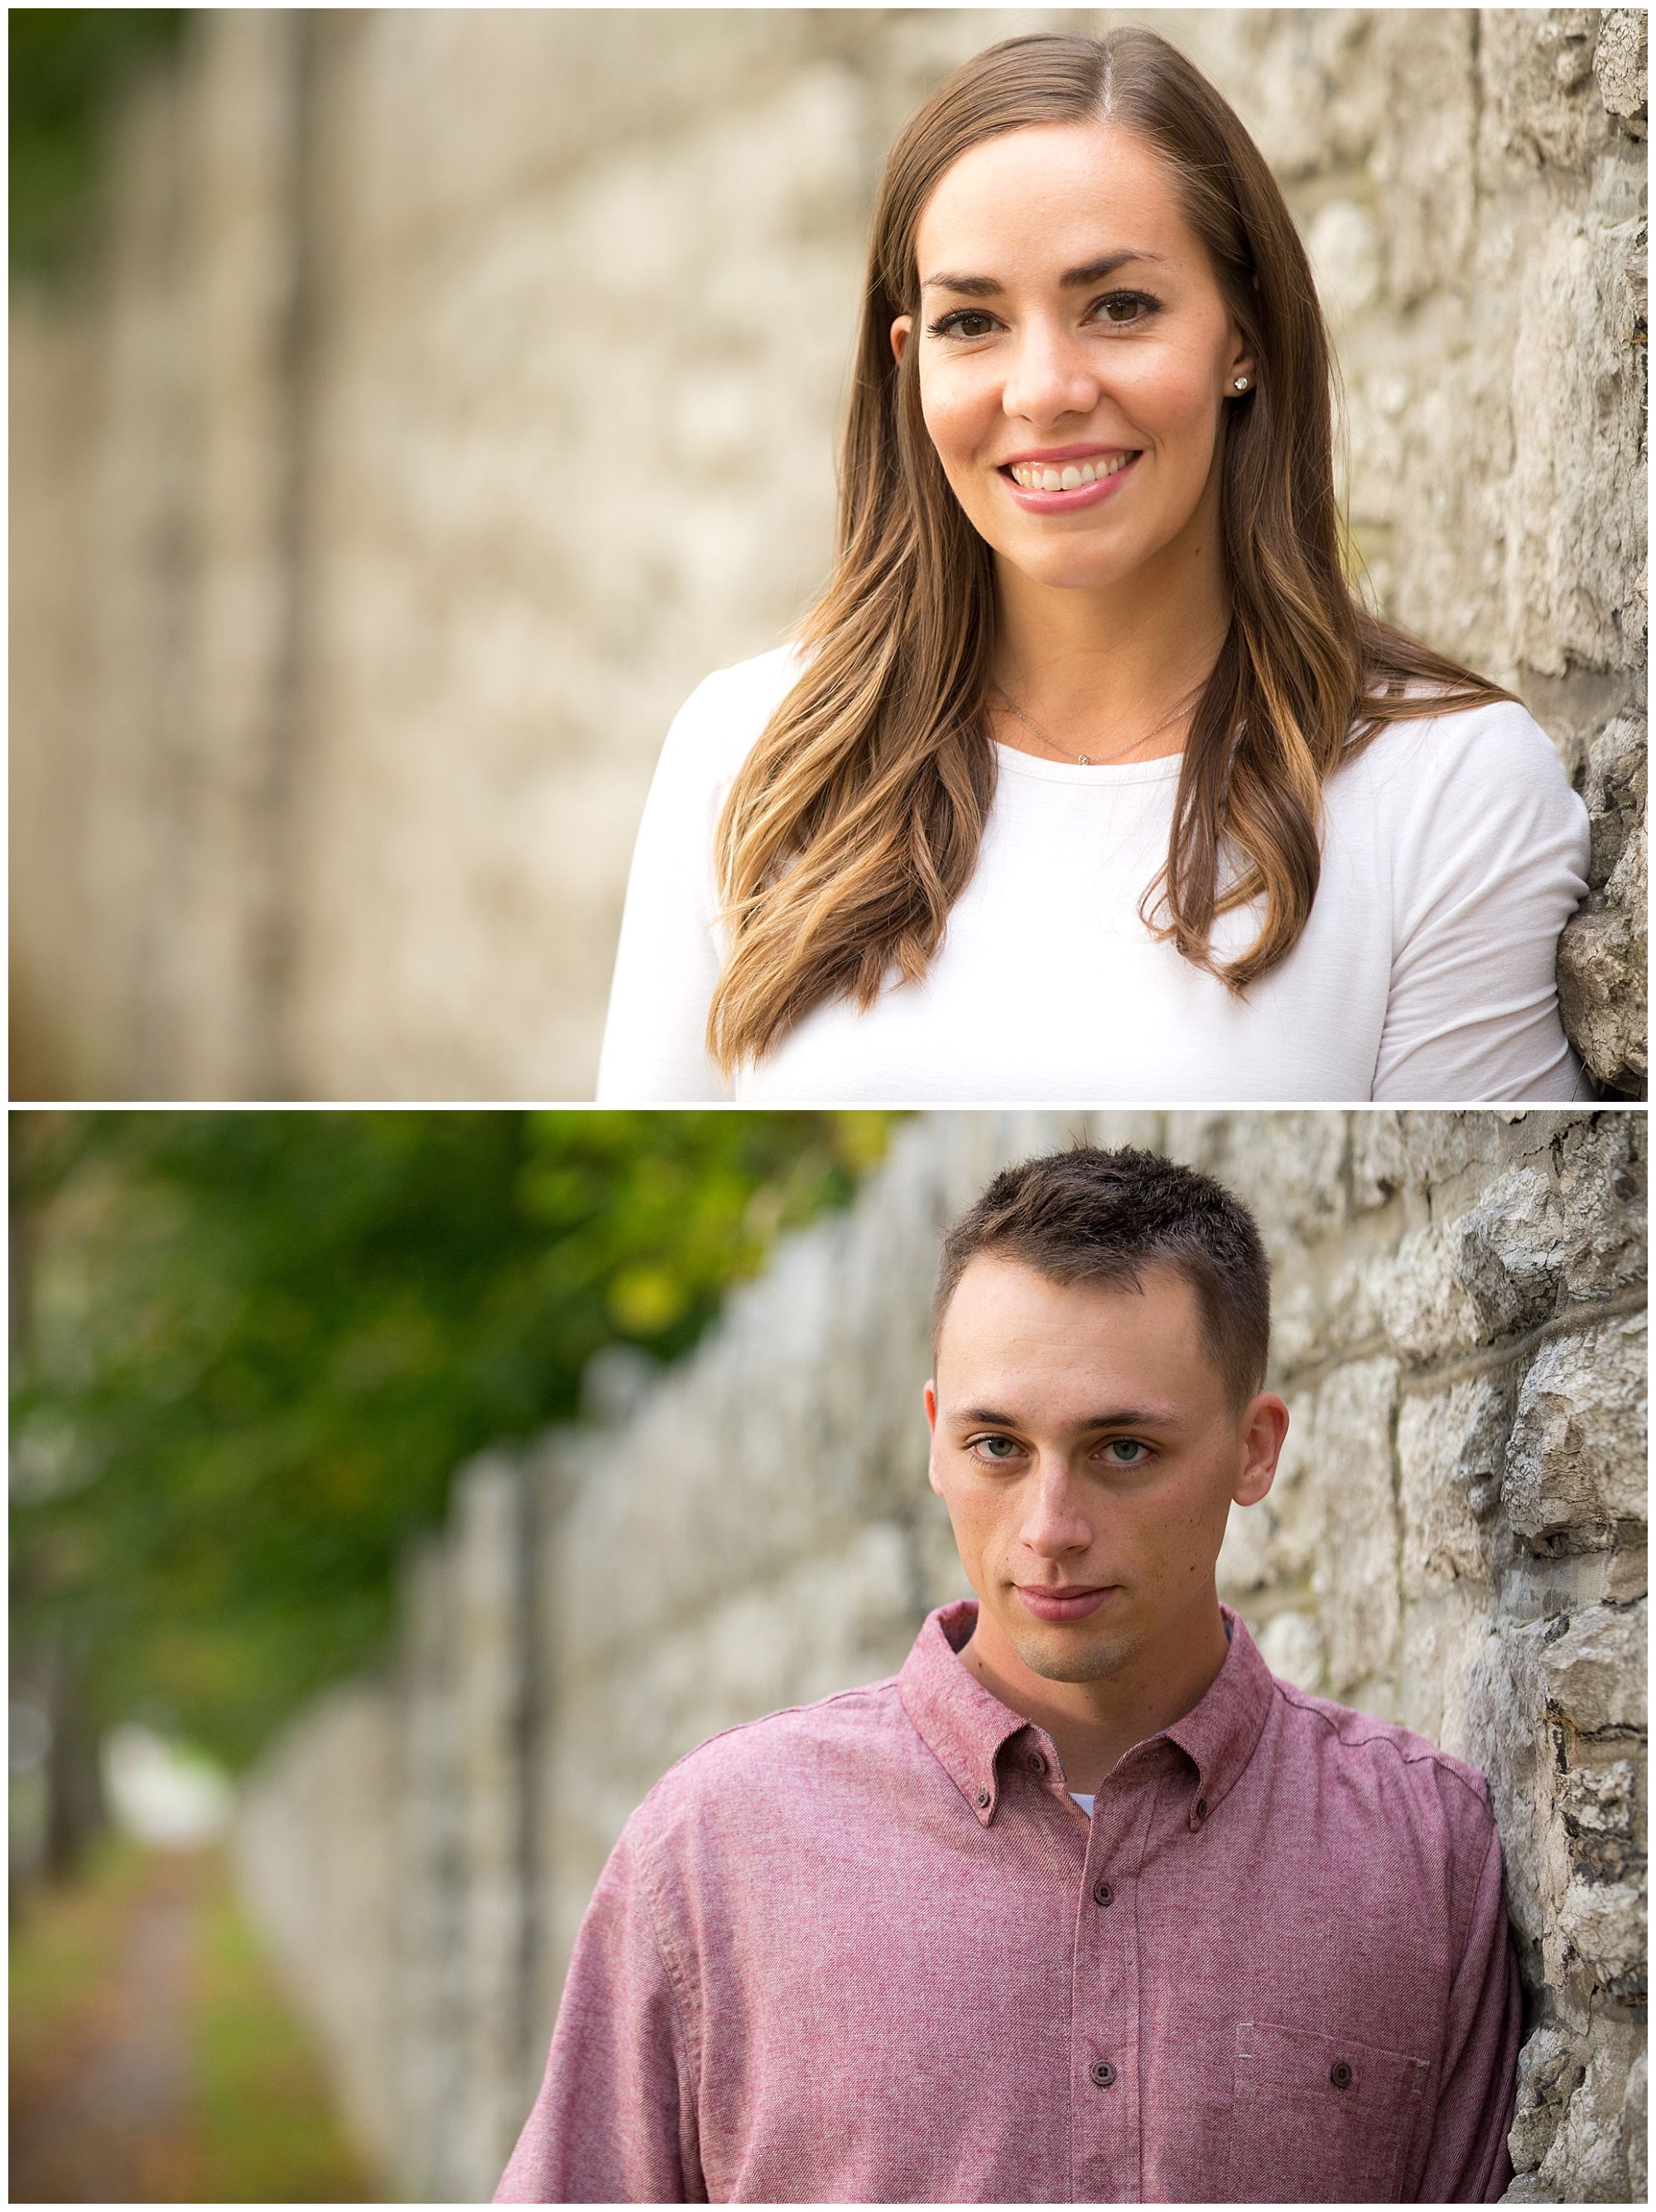 Two individual photos of an engaged couple.